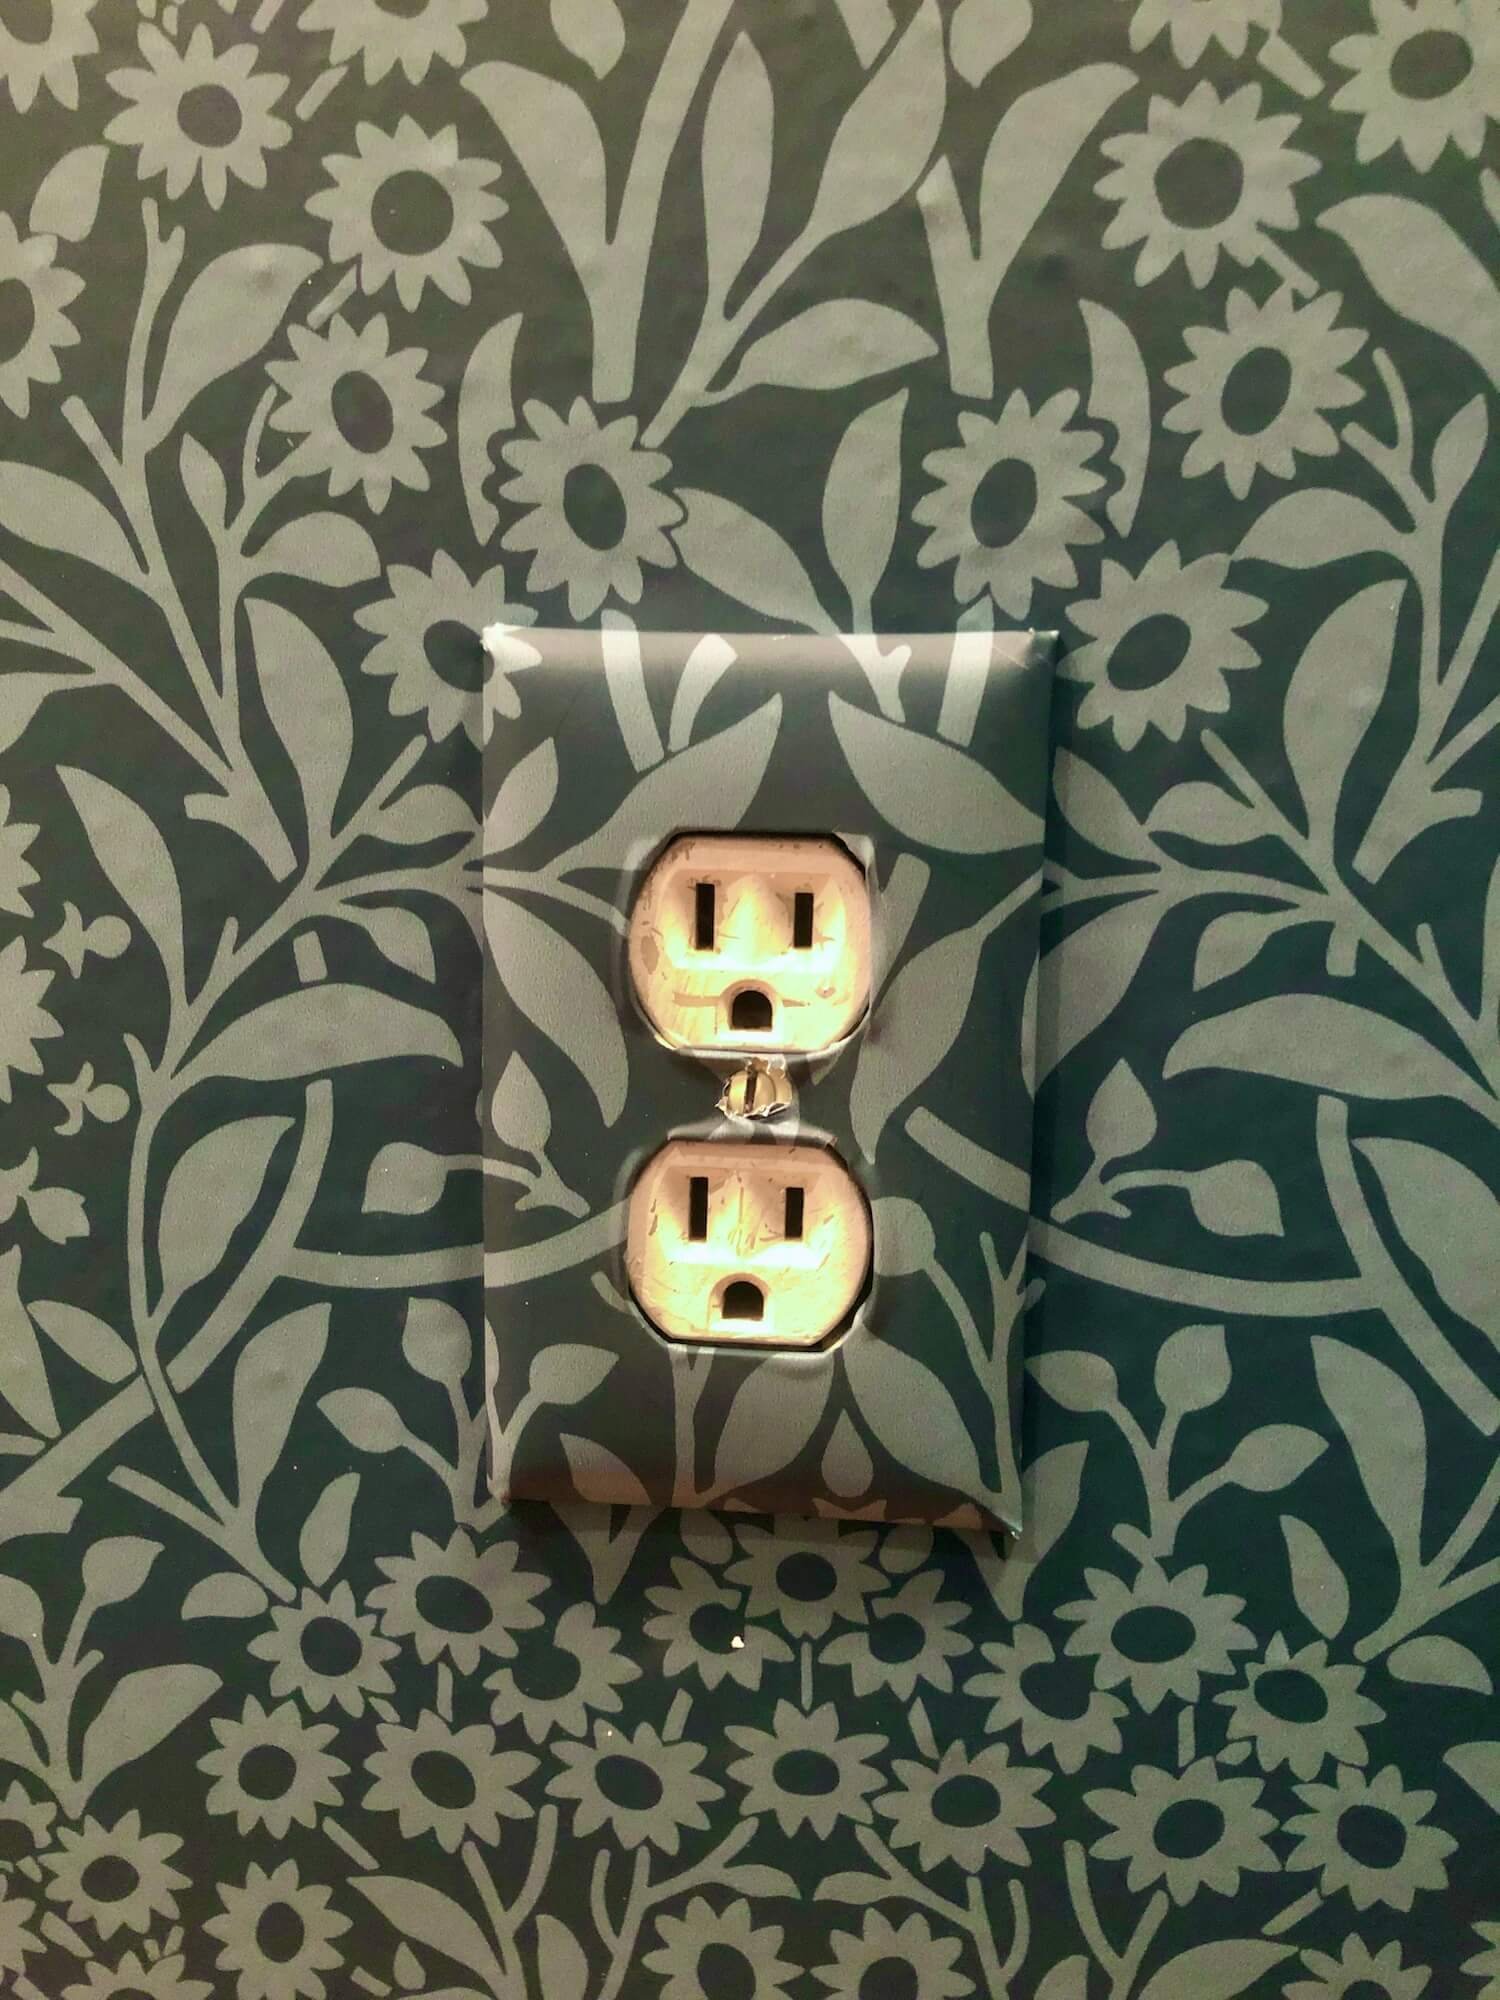 wallpapered outlet cover.jpg